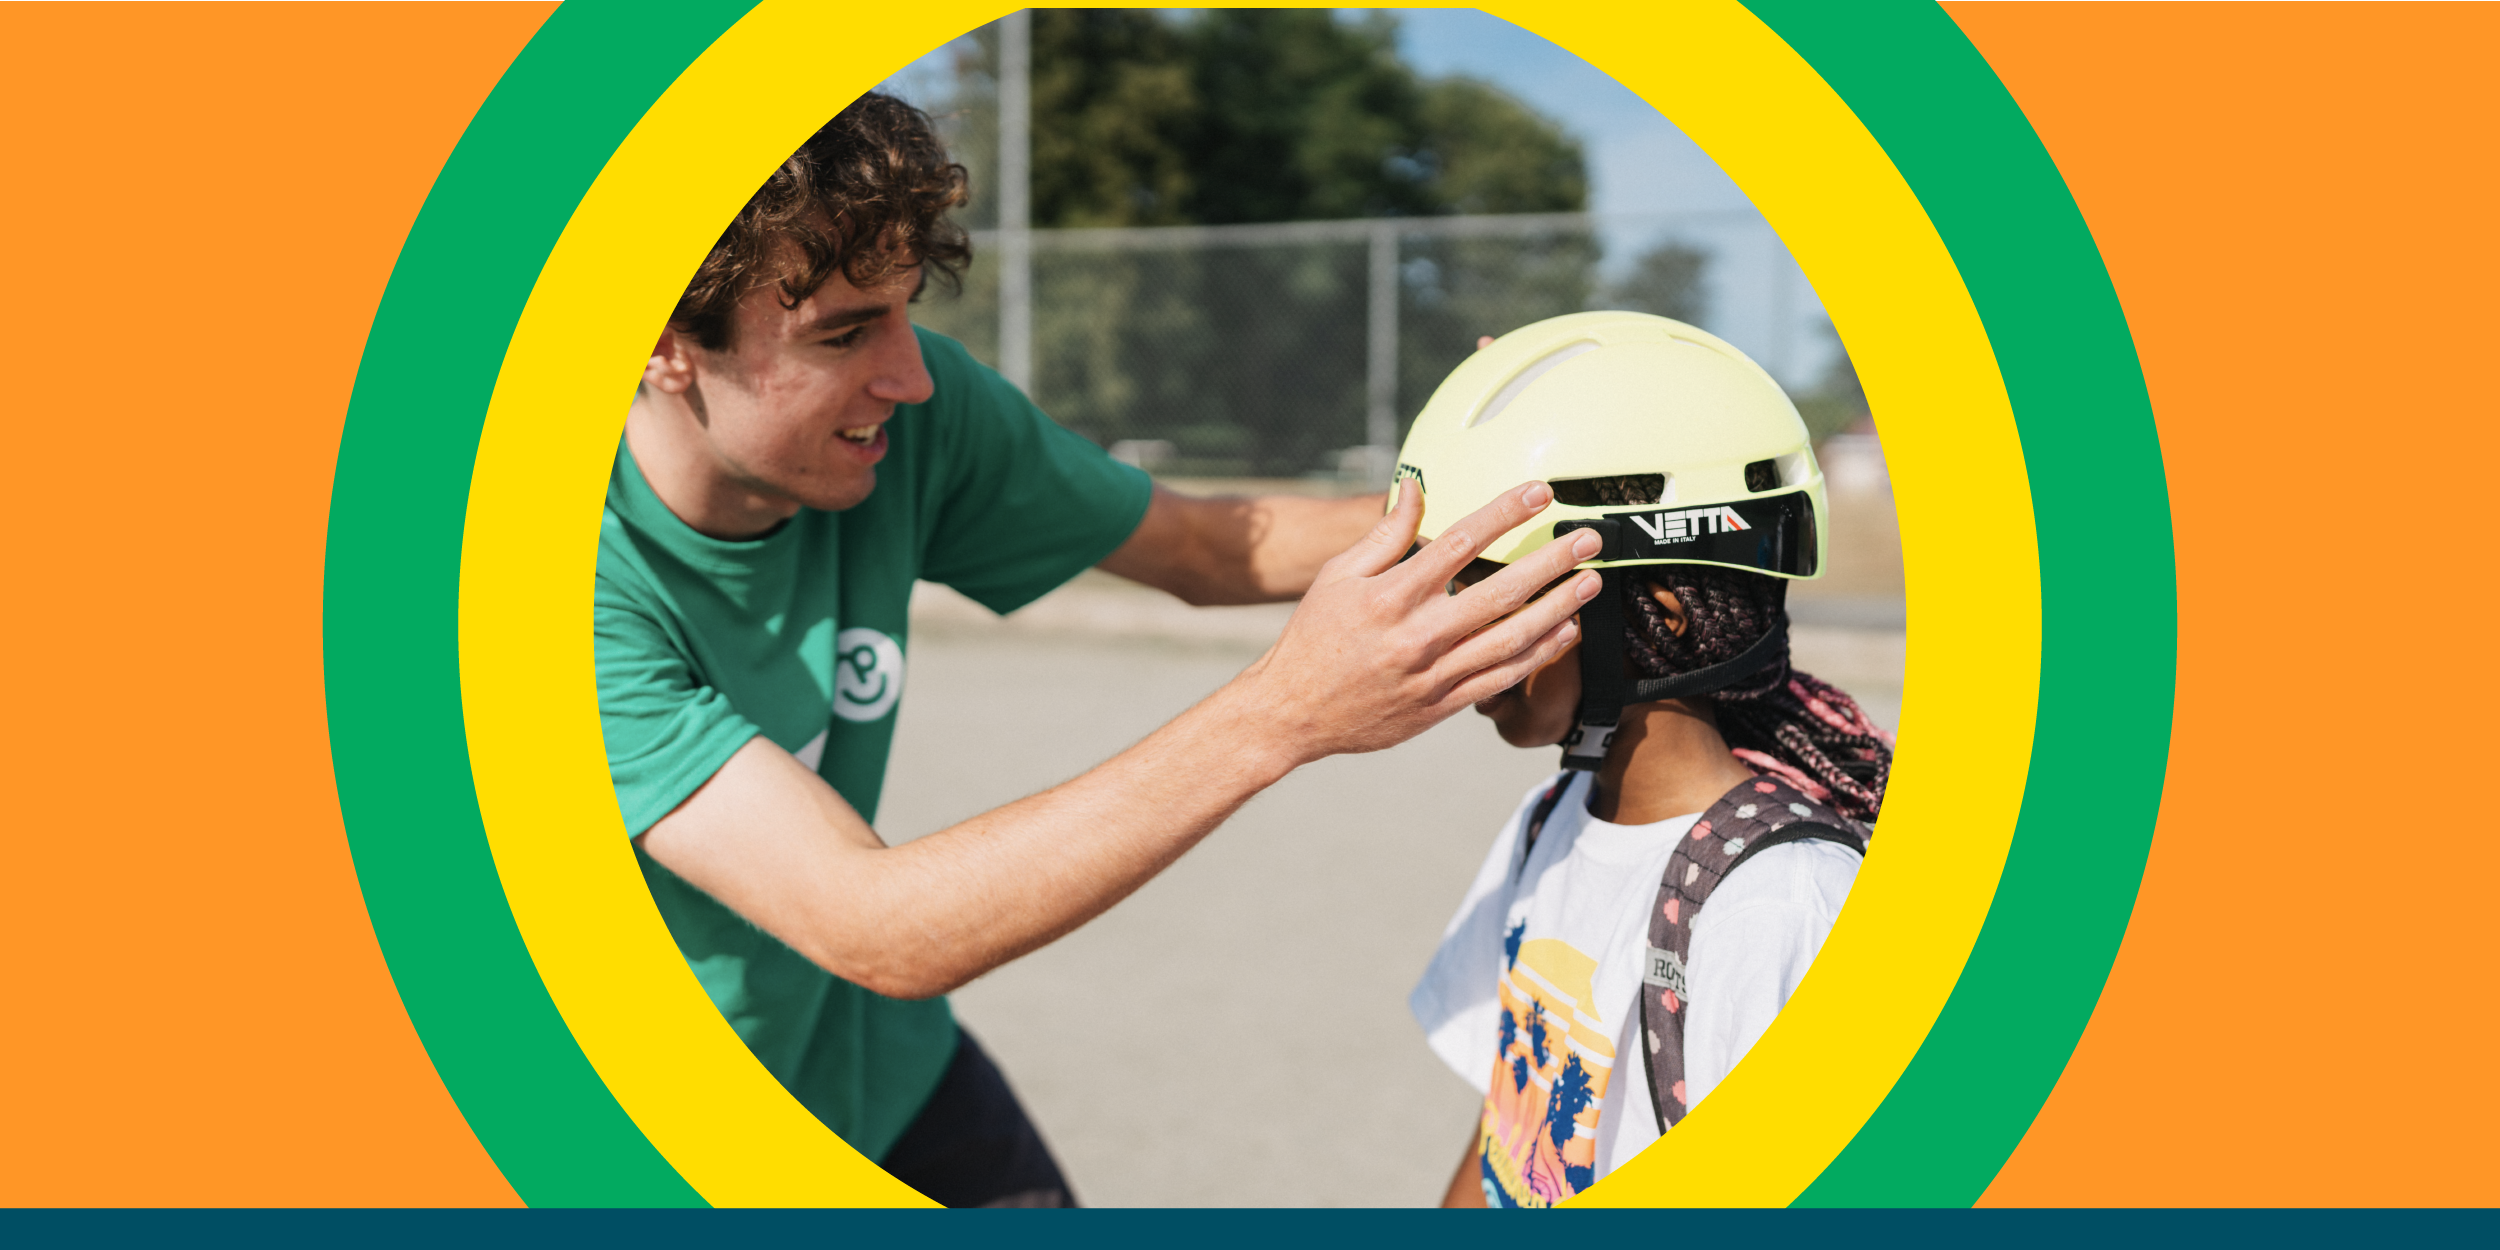 instructor-helping-child-properly-fit-helmet-for-safe-riding